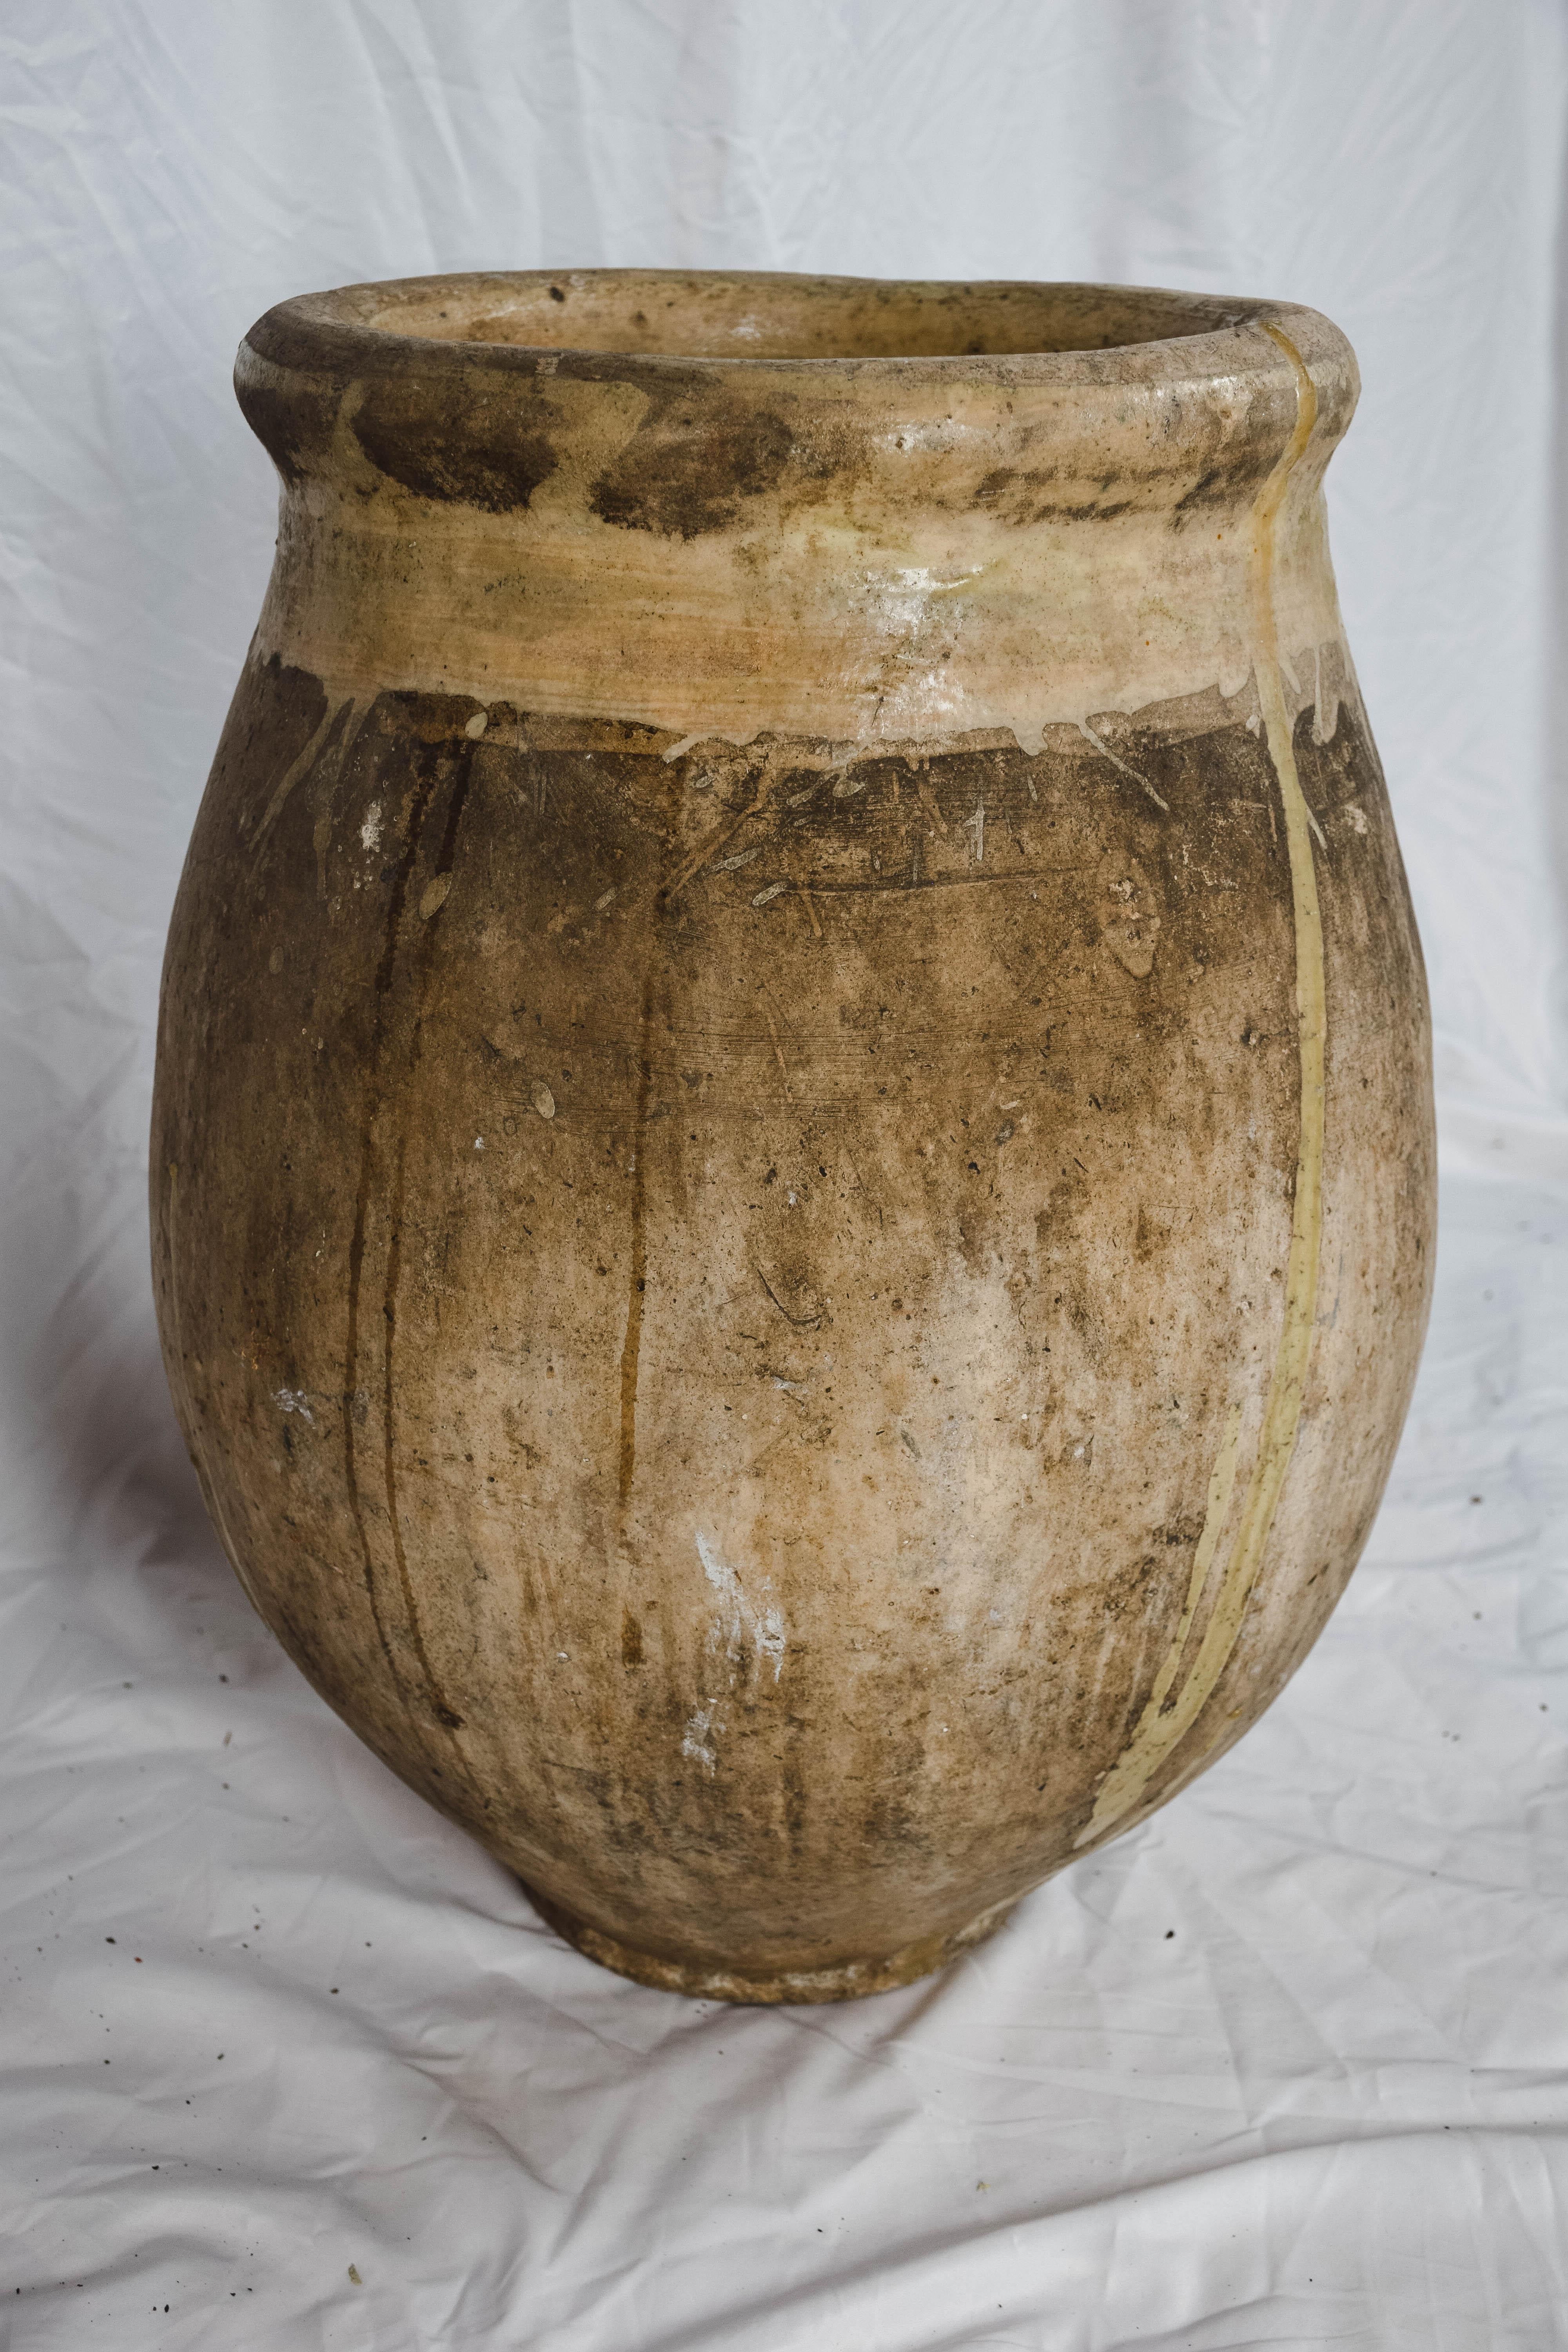 French Provincial 19th Century French Terracotta Biot Jar